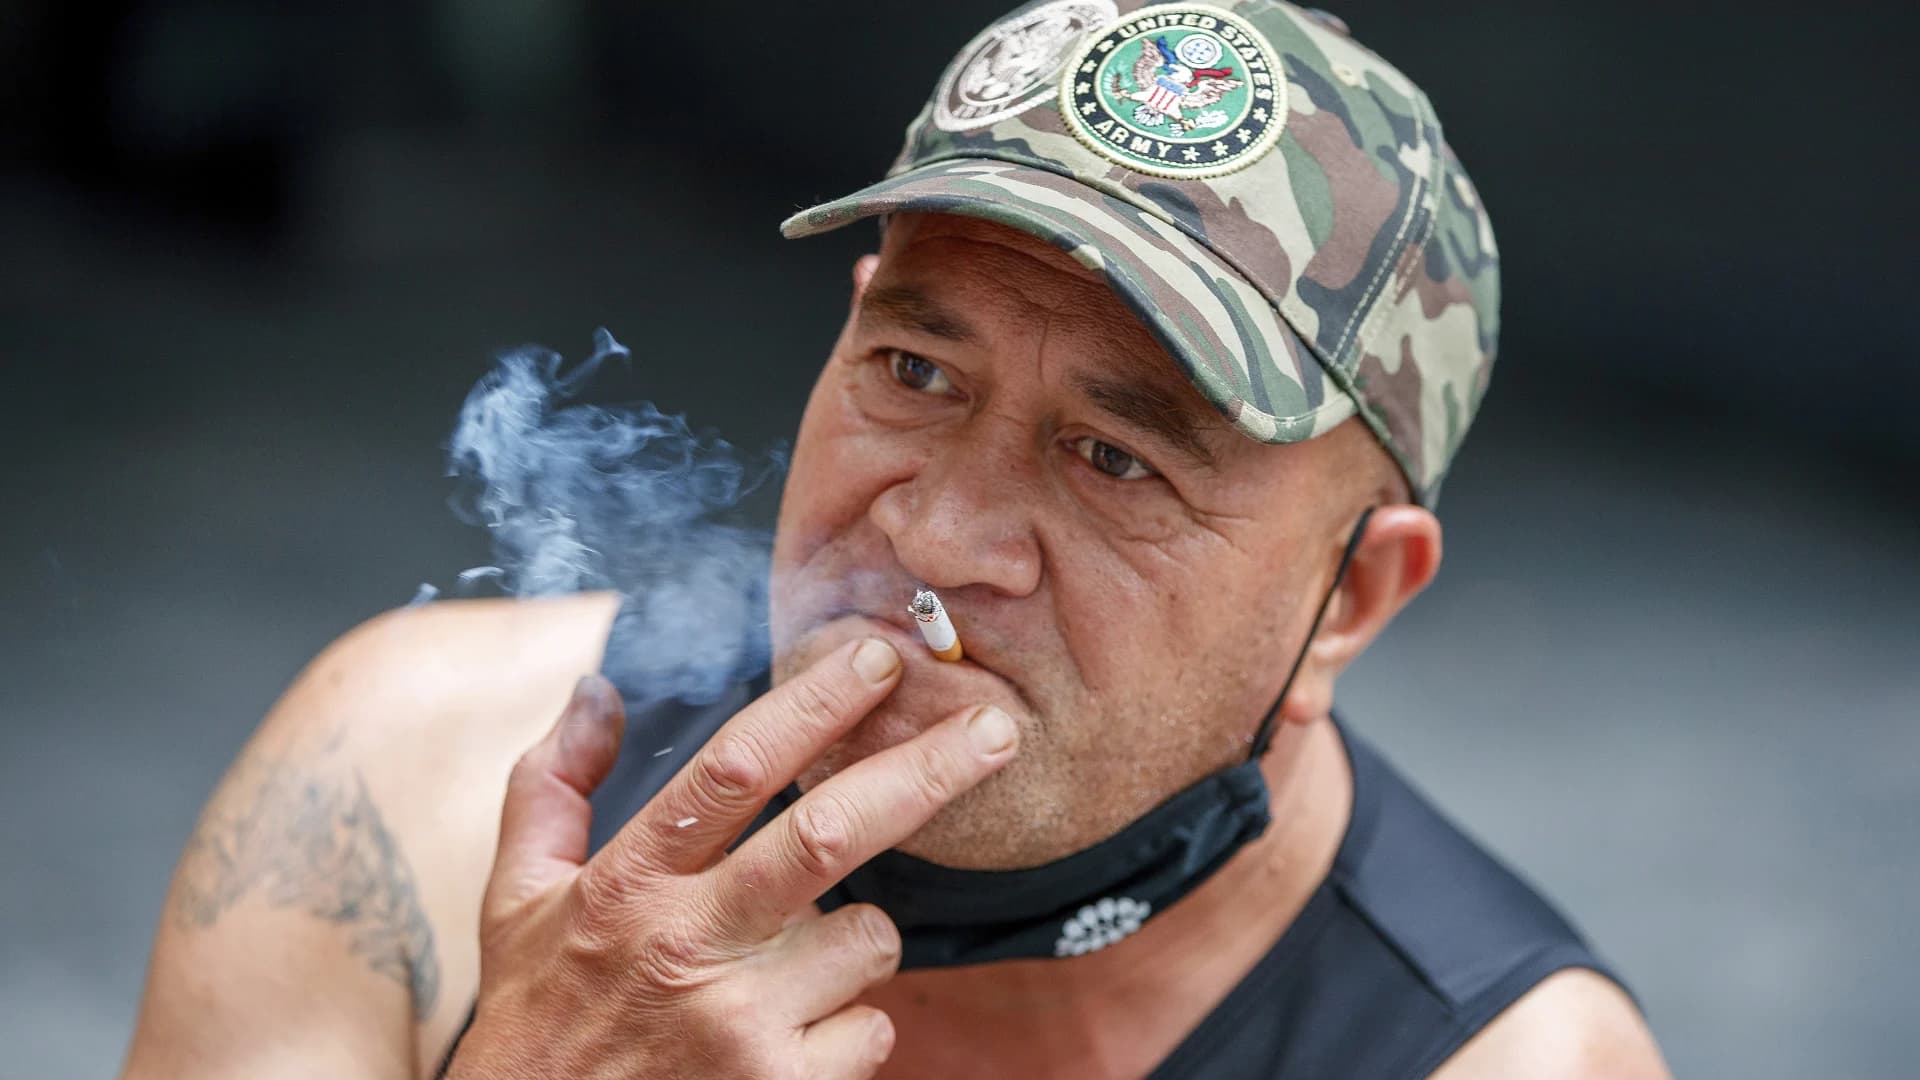 New Zealand's plan to end smoking: A lifetime ban for youth